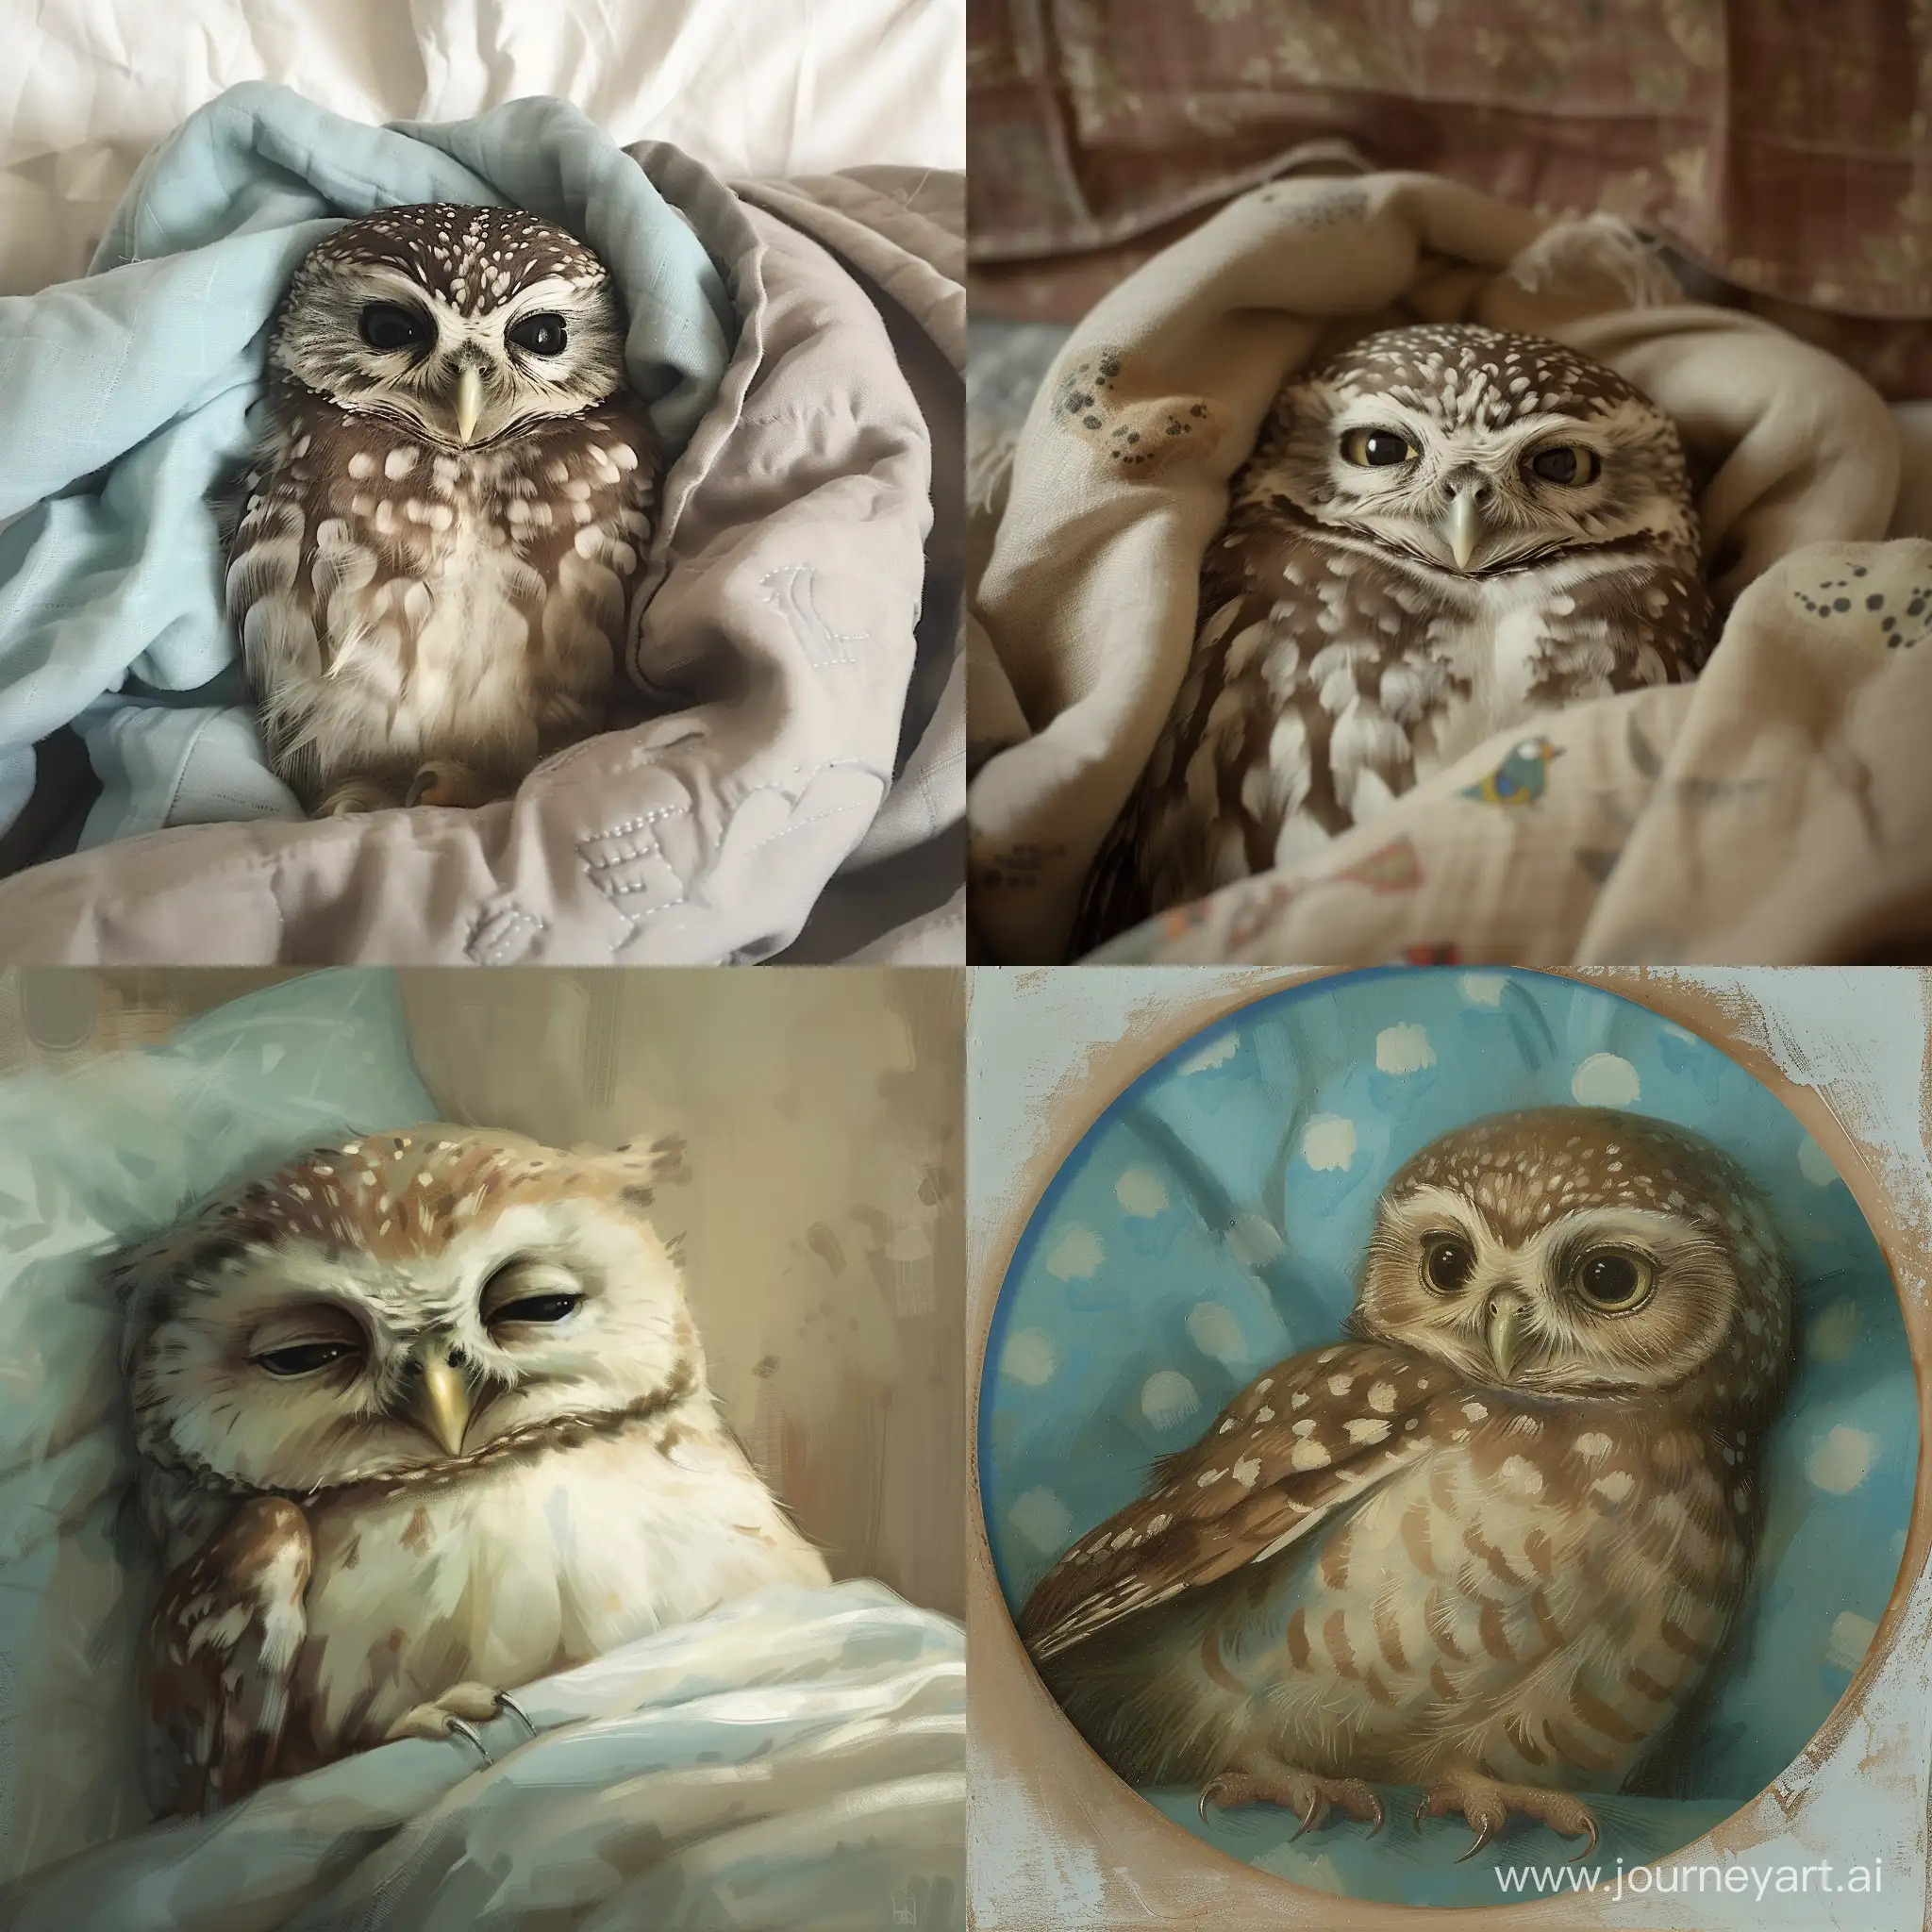 Adorable-Little-Owl-Sleeping-Peacefully-in-Bed-Sweet-Dreams-Baby